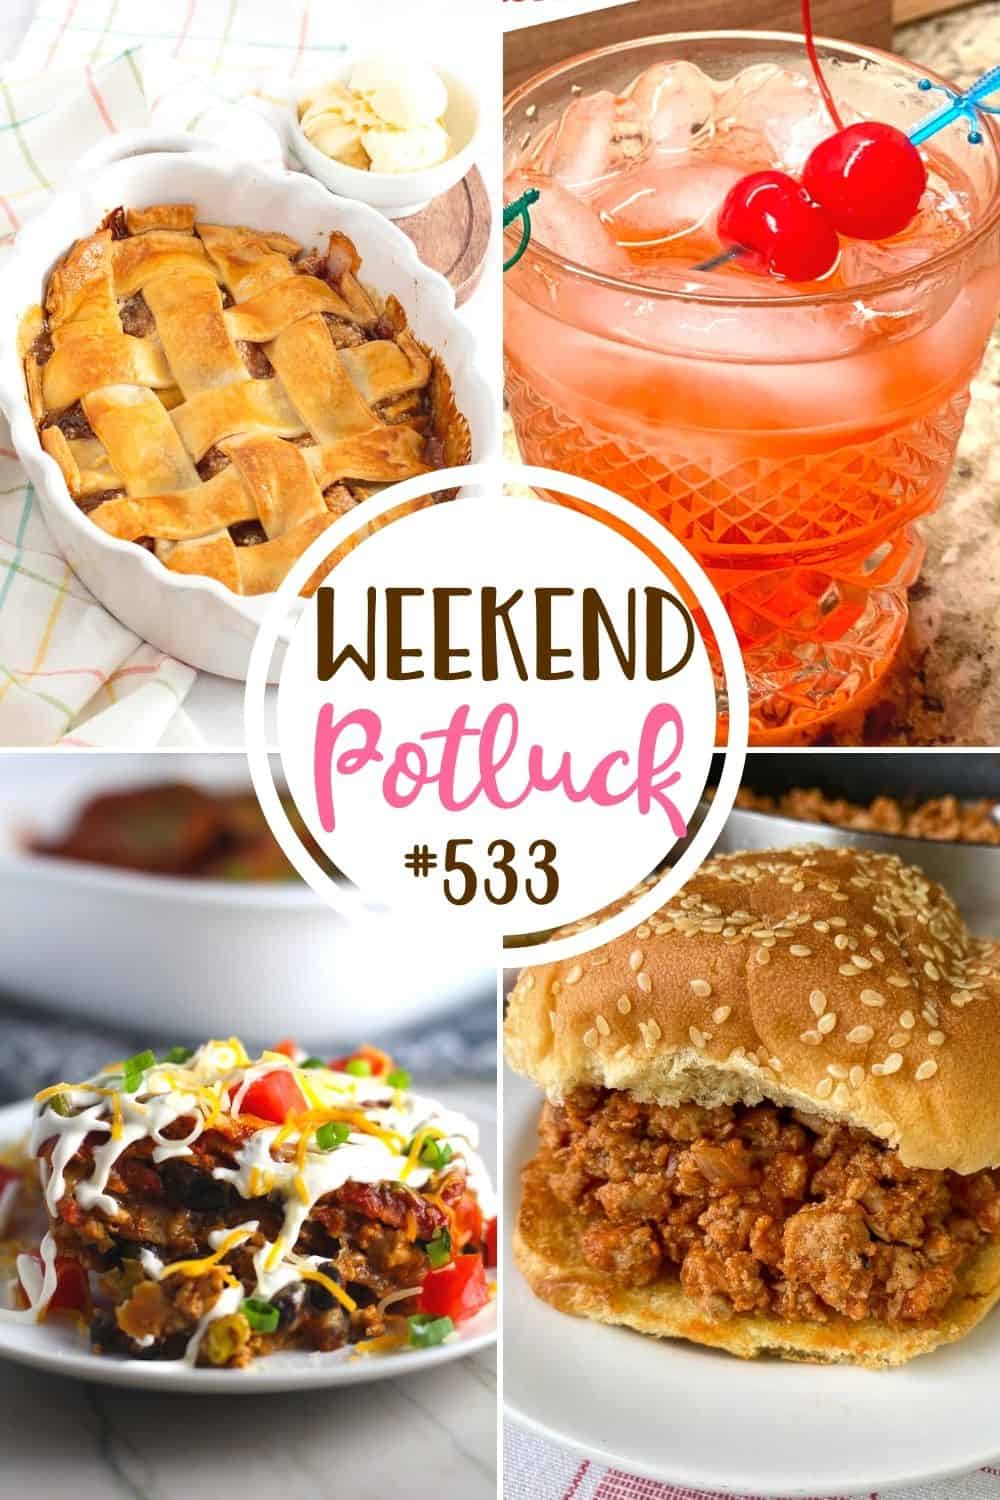 Weekend Potluck featured recipe include: Sloppy Jane Sandwiches, Easy Peach Cobbler, Ground Chicken Taco Casserole and Dirty Shirley cocktail.